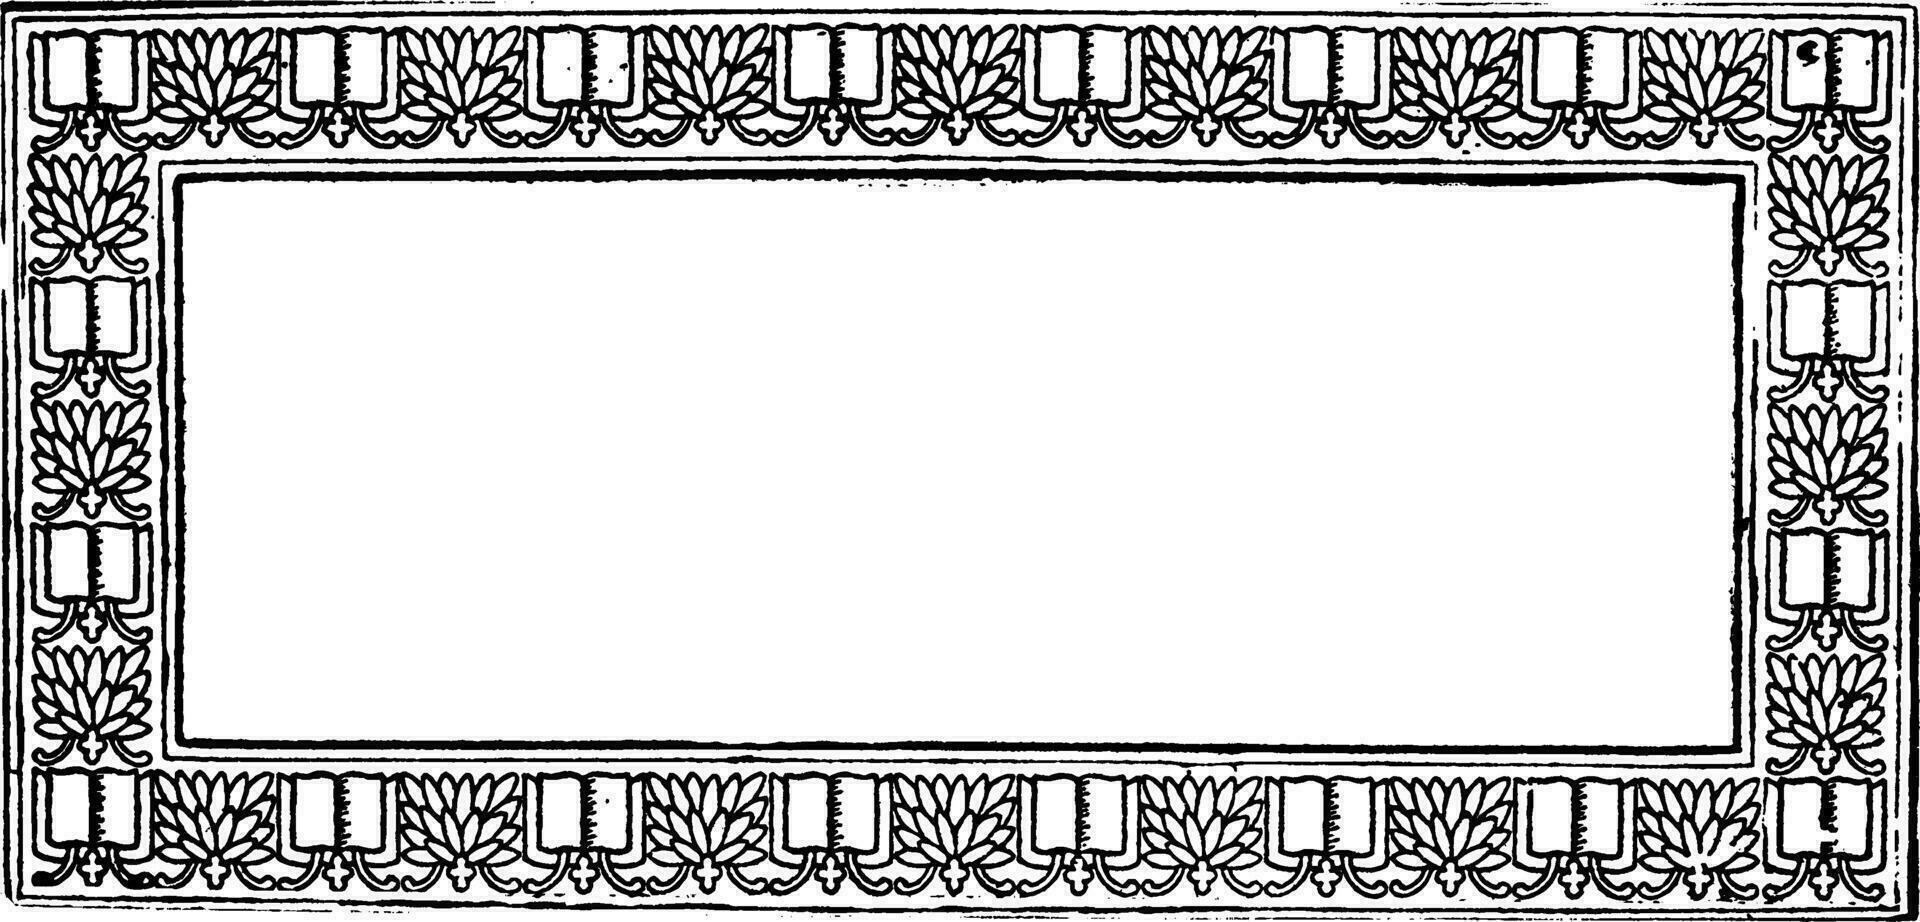 Book and Floral Border is a antique pattern, vintage engraving. vector